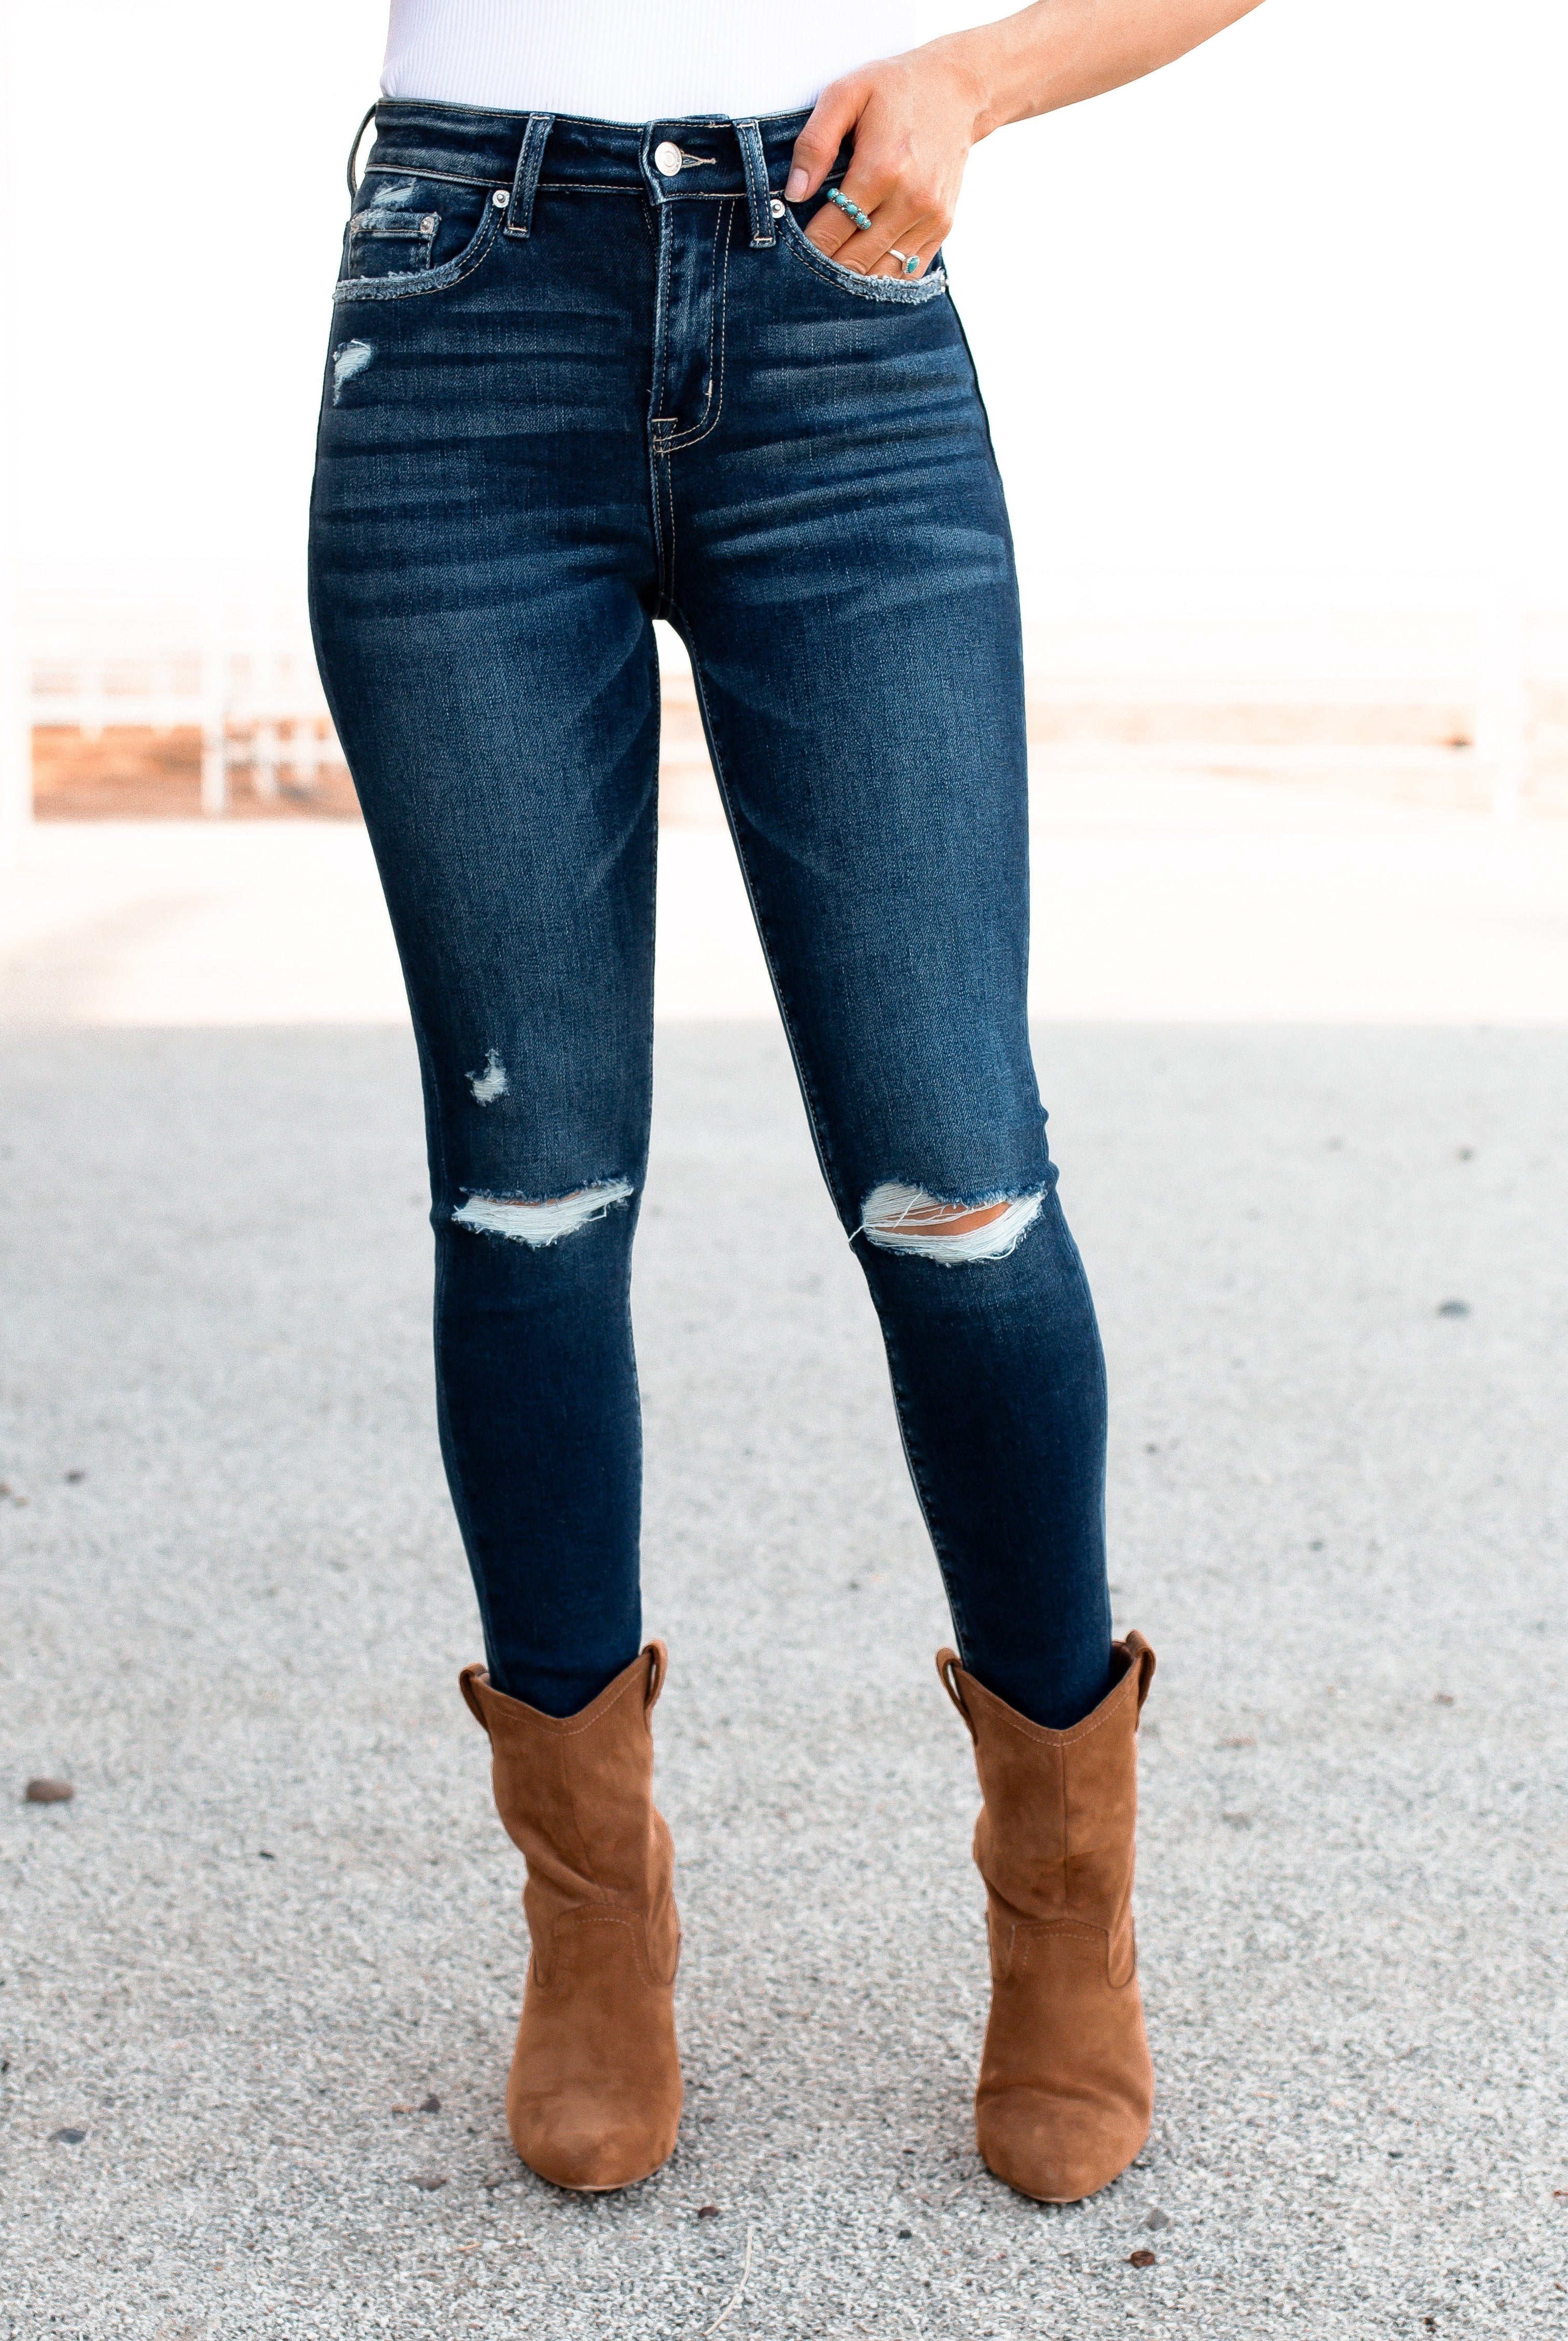 Fit Like a Glove Perfect Fall Denim-Jeans-Krush Kandy, Women's Online Fashion Boutique Located in Phoenix, Arizona (Scottsdale Area)